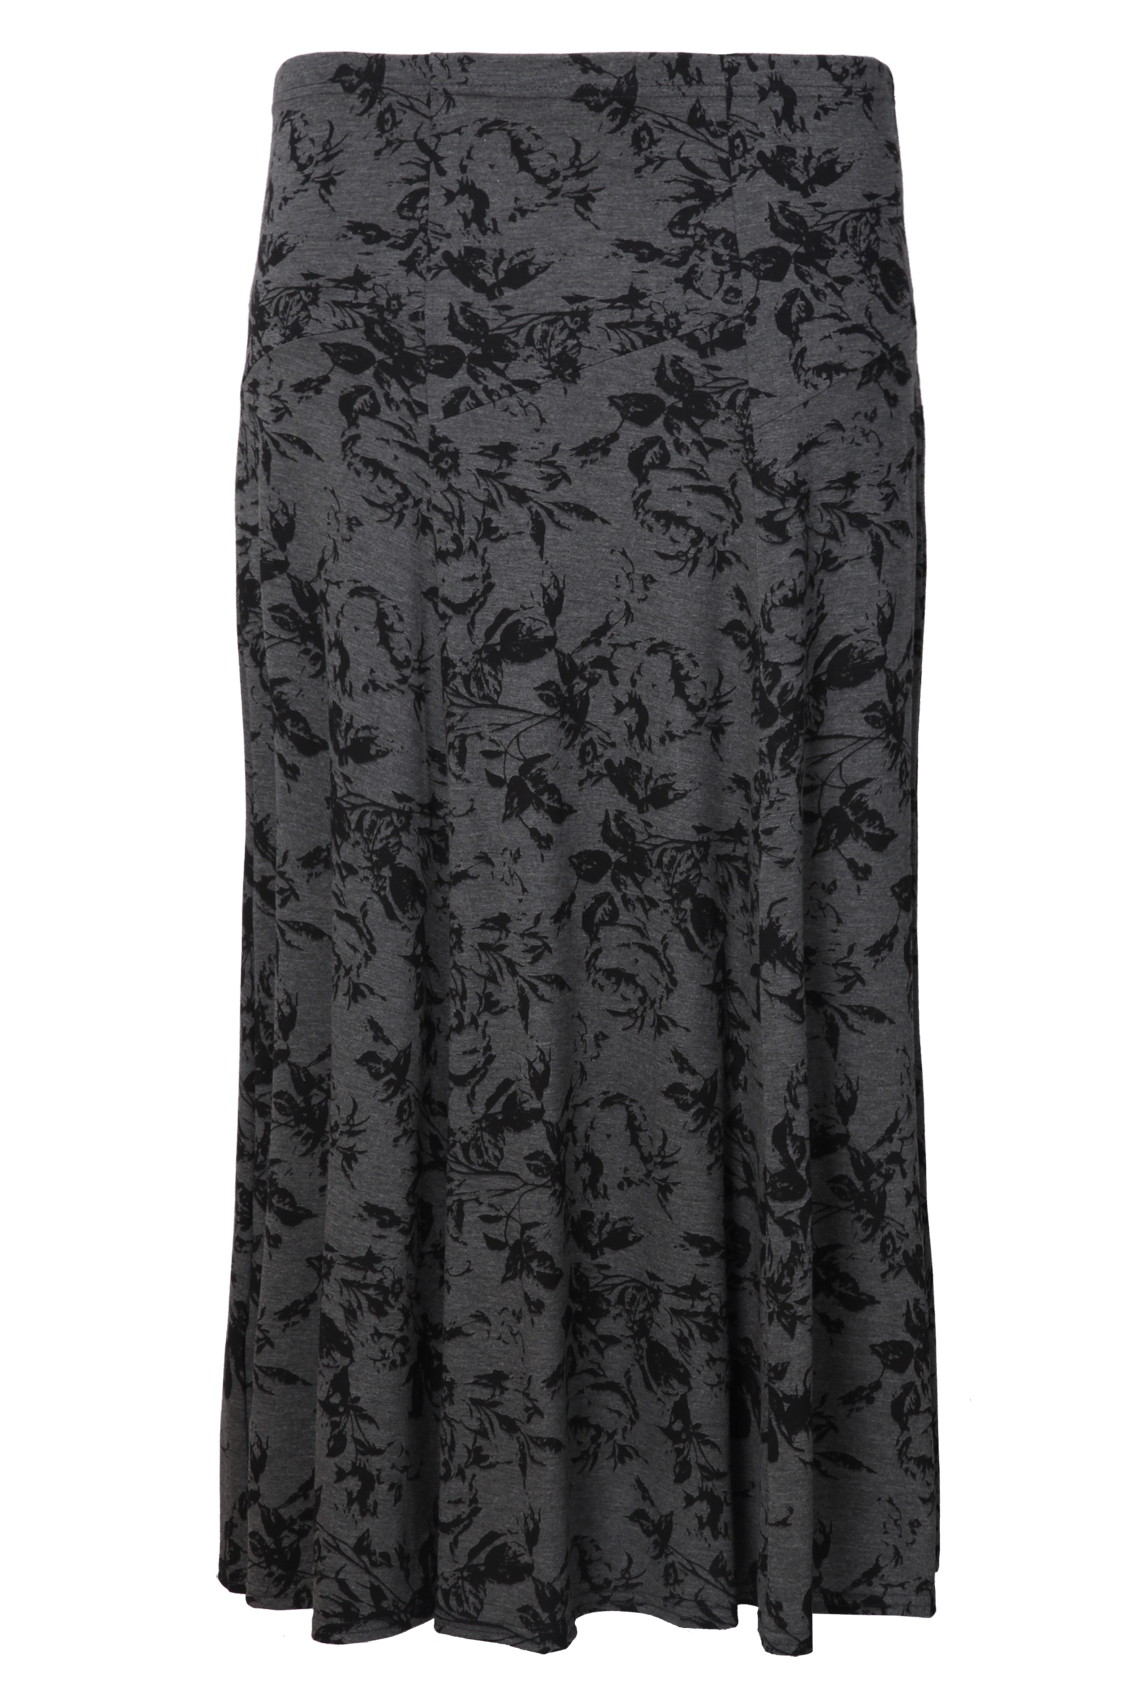 Charcoal Marl Floral Print Long Panelled Skirt plus size 16,18,20,22,24 ...